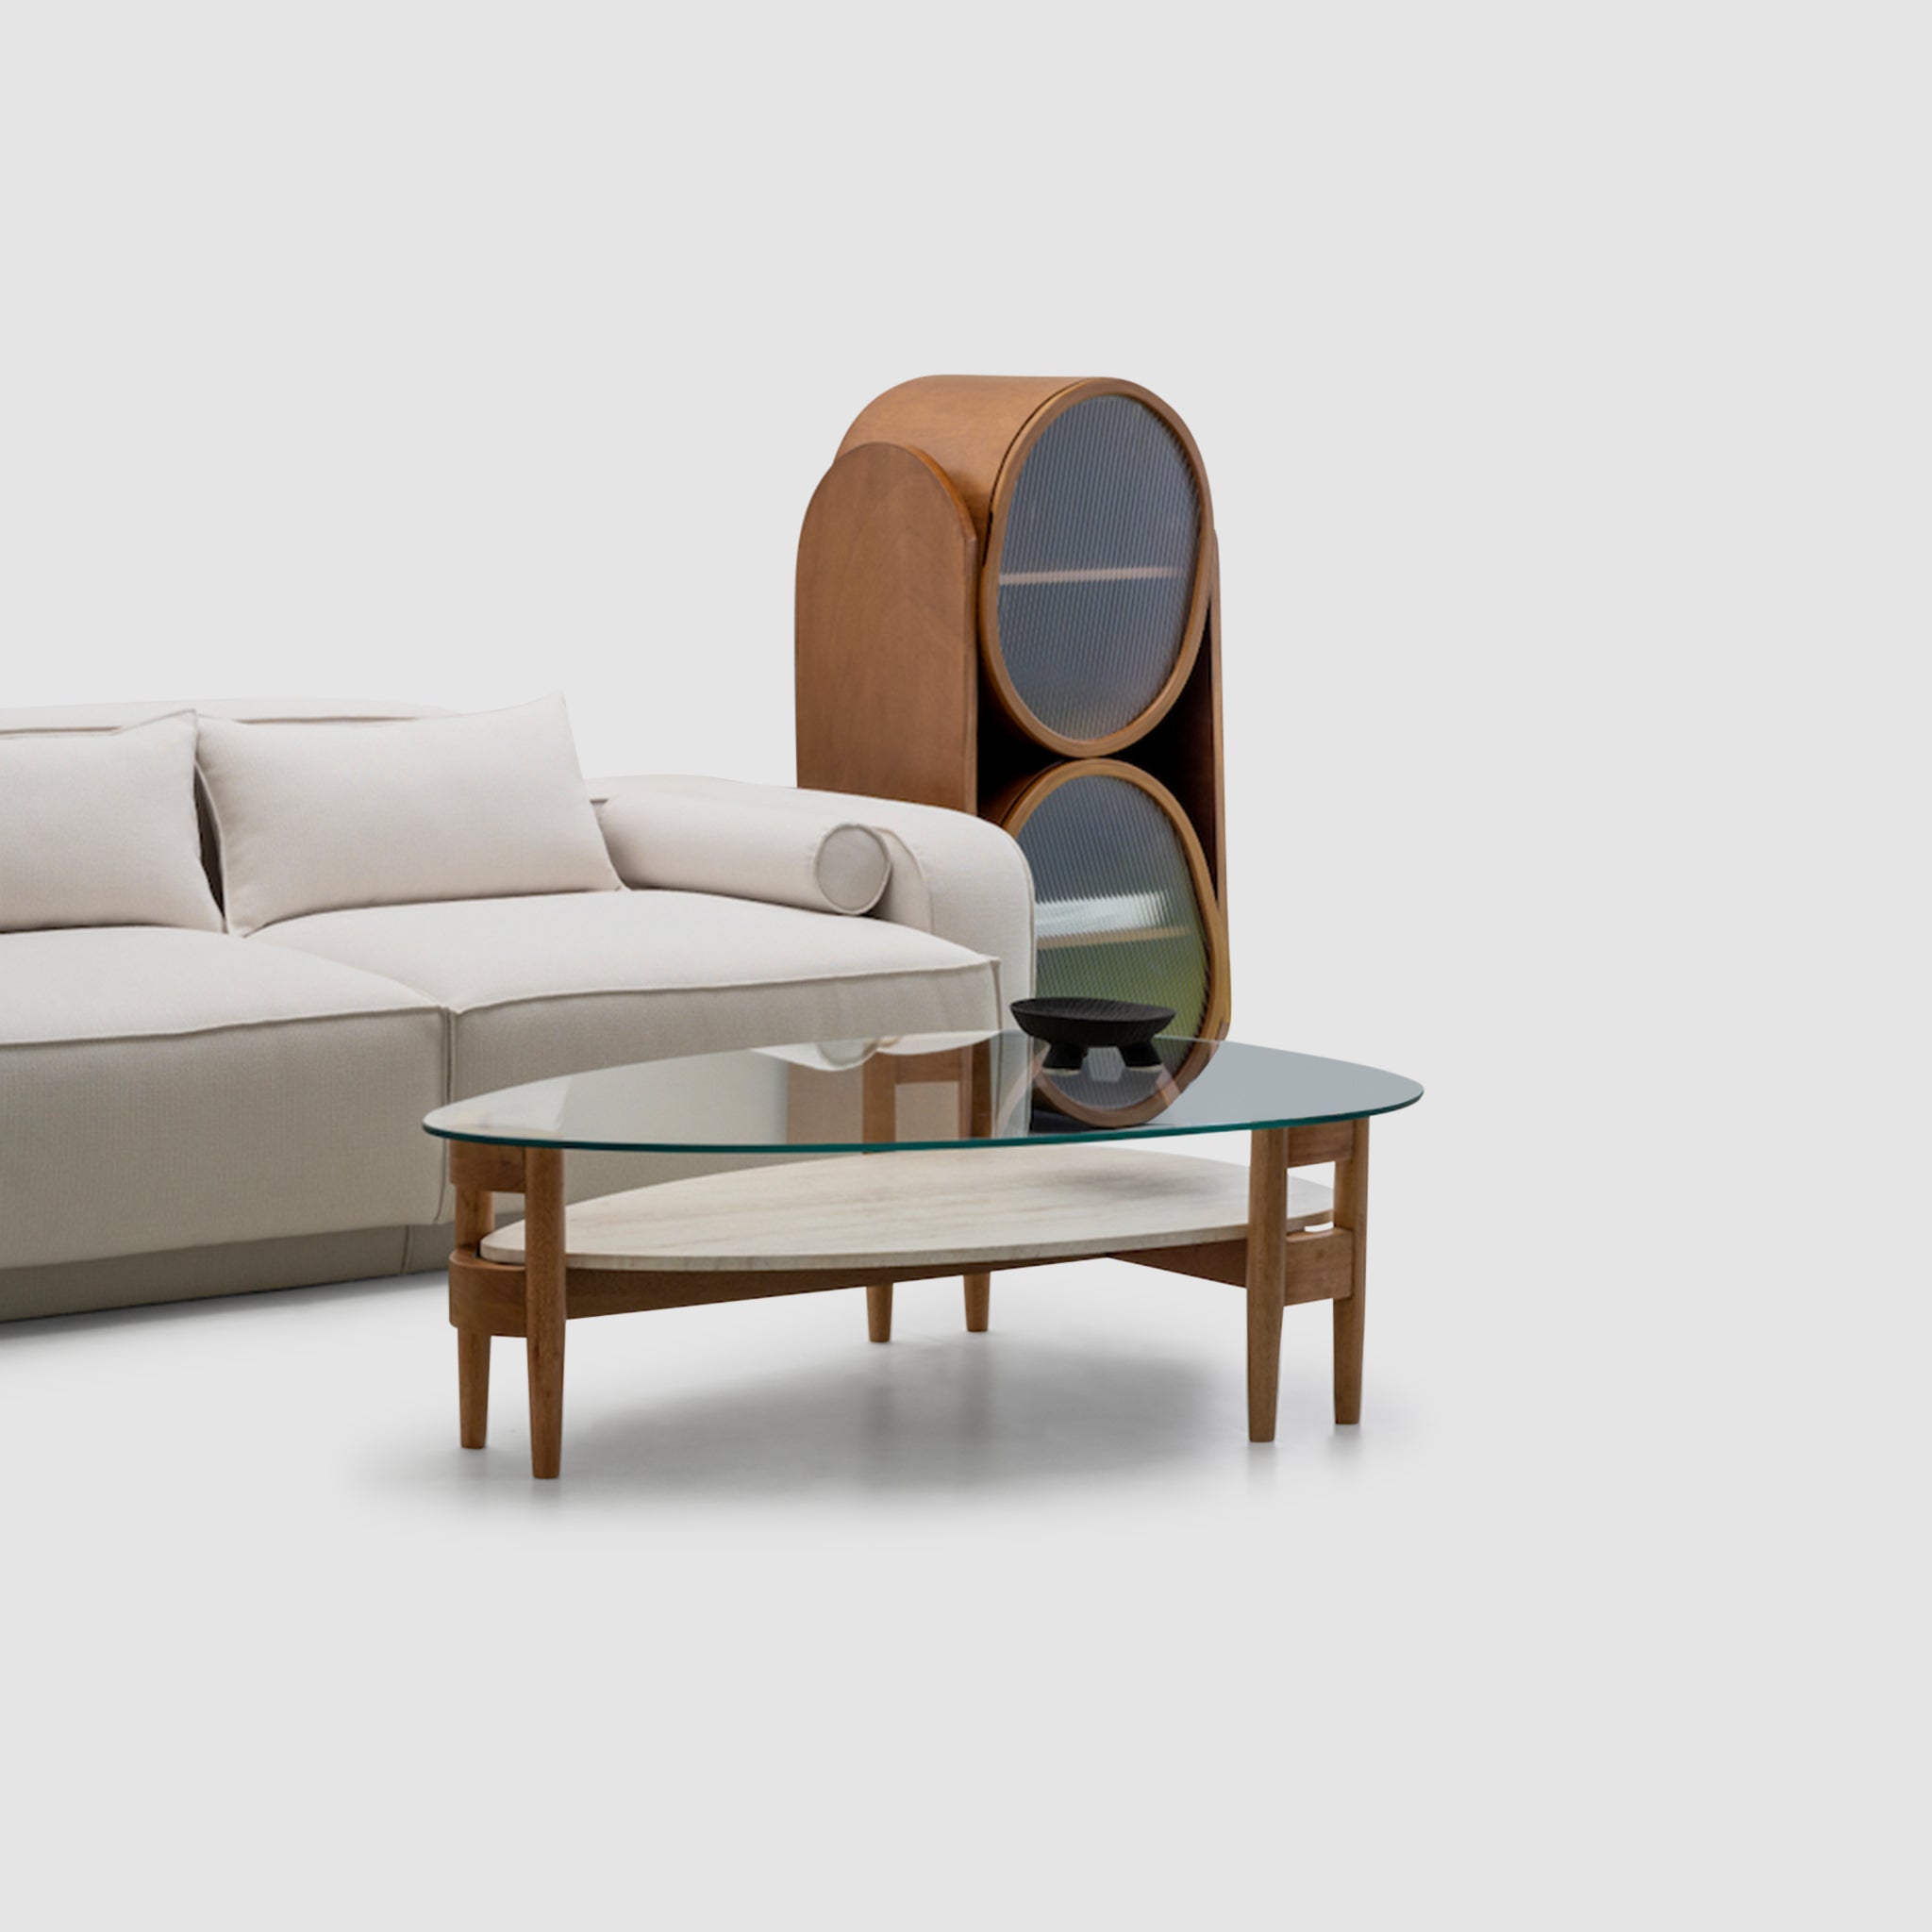 White L-shaped sofa anchors a conversation area in this mid-century modern living room with a brown leather ottoman and a black lamp on a round wooden table.